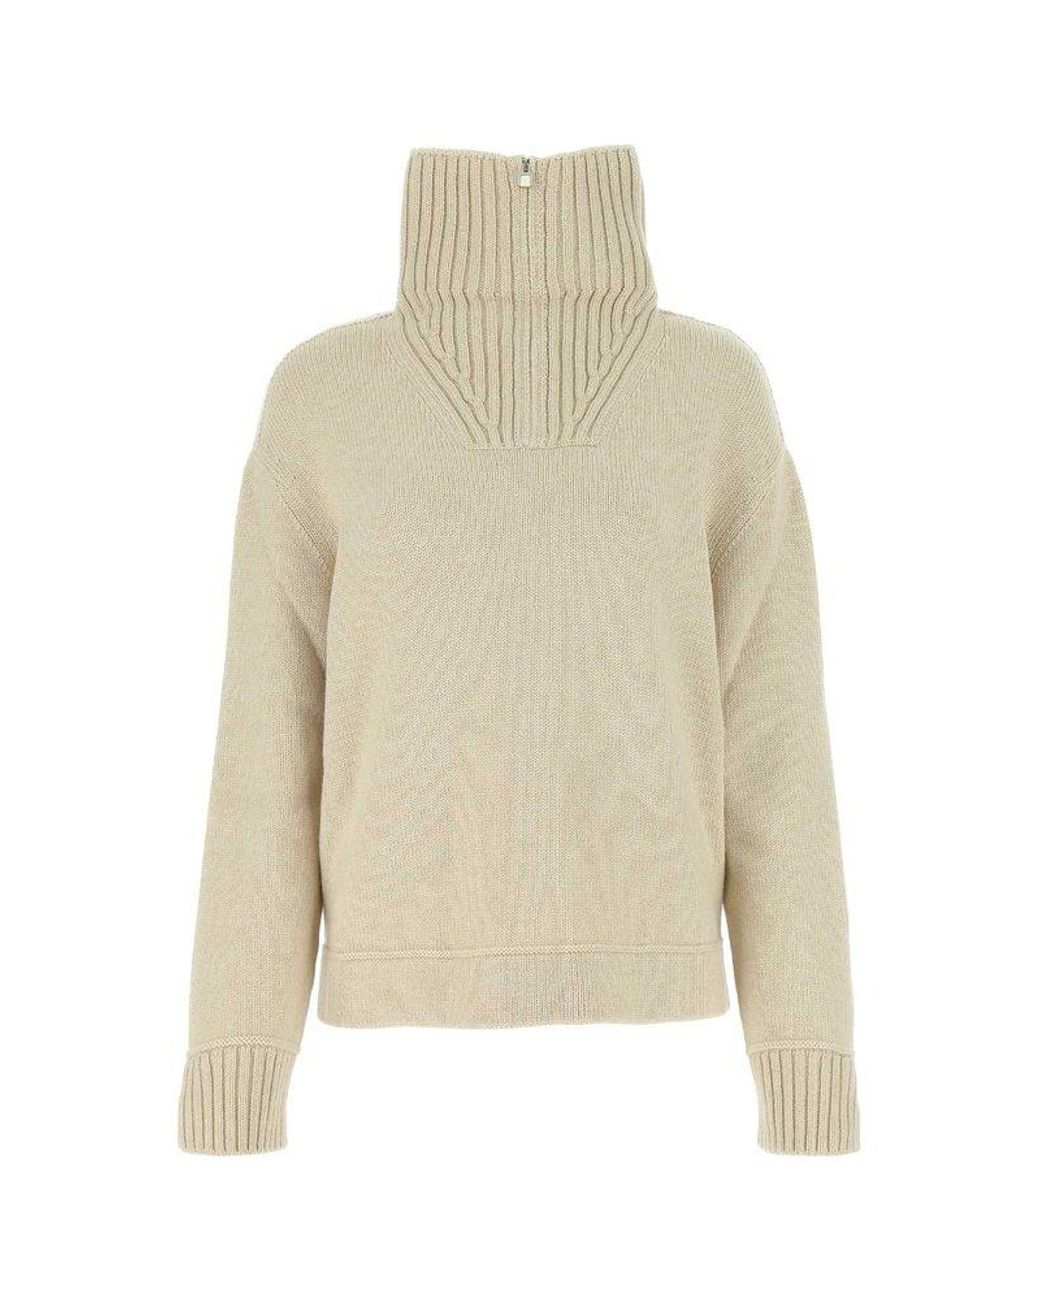 Loro Piana Northdowns Half-zip Knitted Jumper in Natural | Lyst